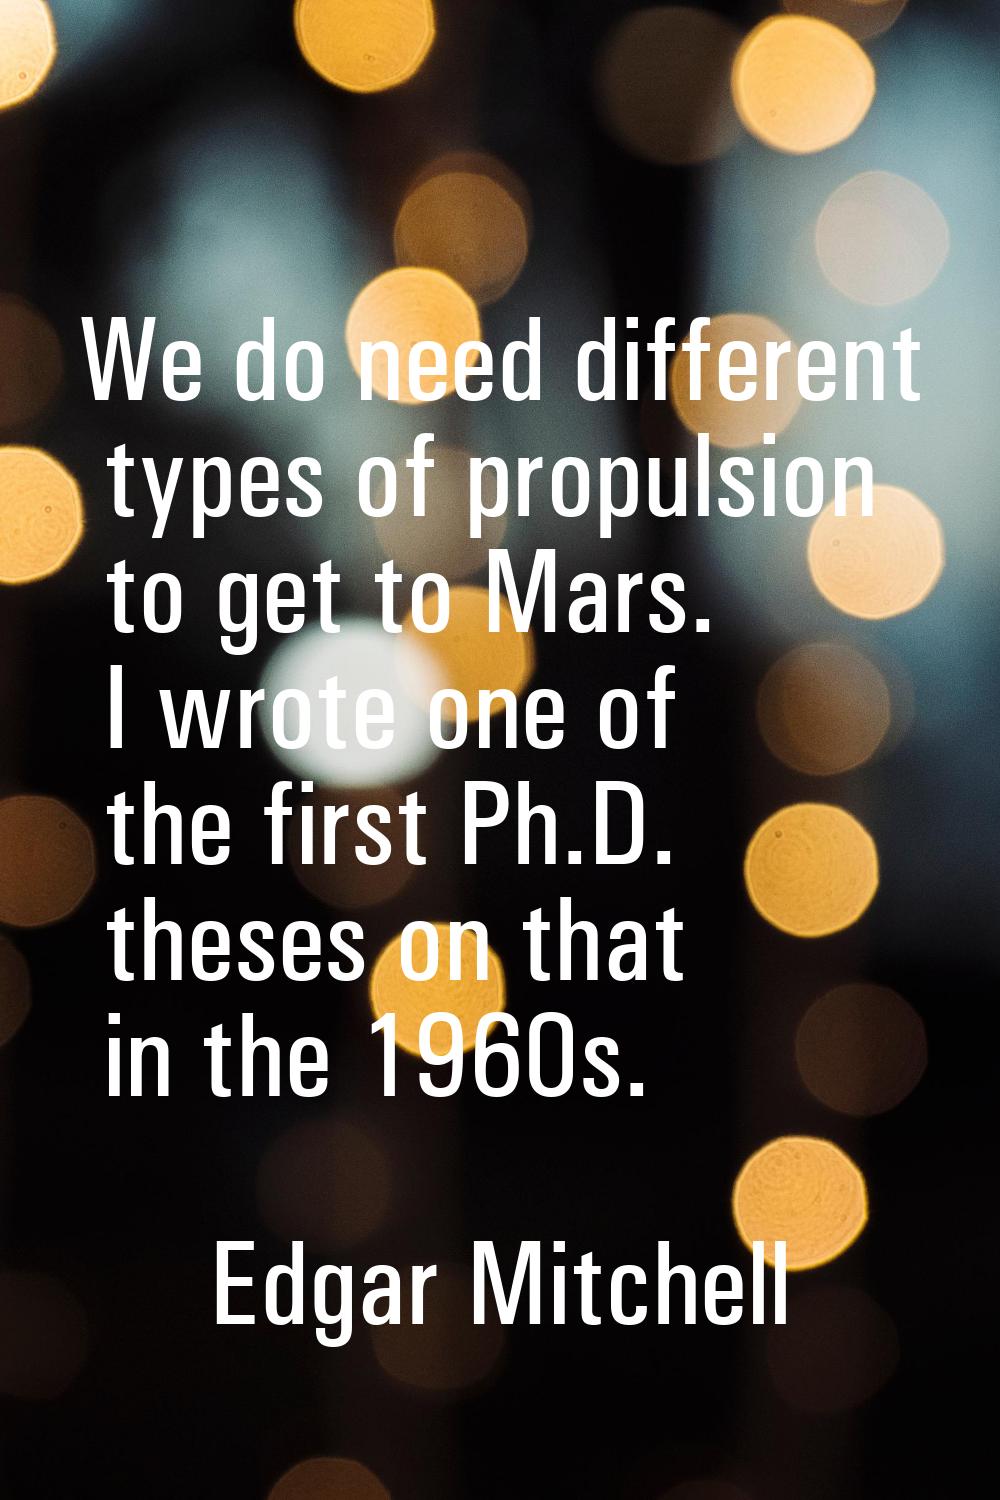 We do need different types of propulsion to get to Mars. I wrote one of the first Ph.D. theses on t